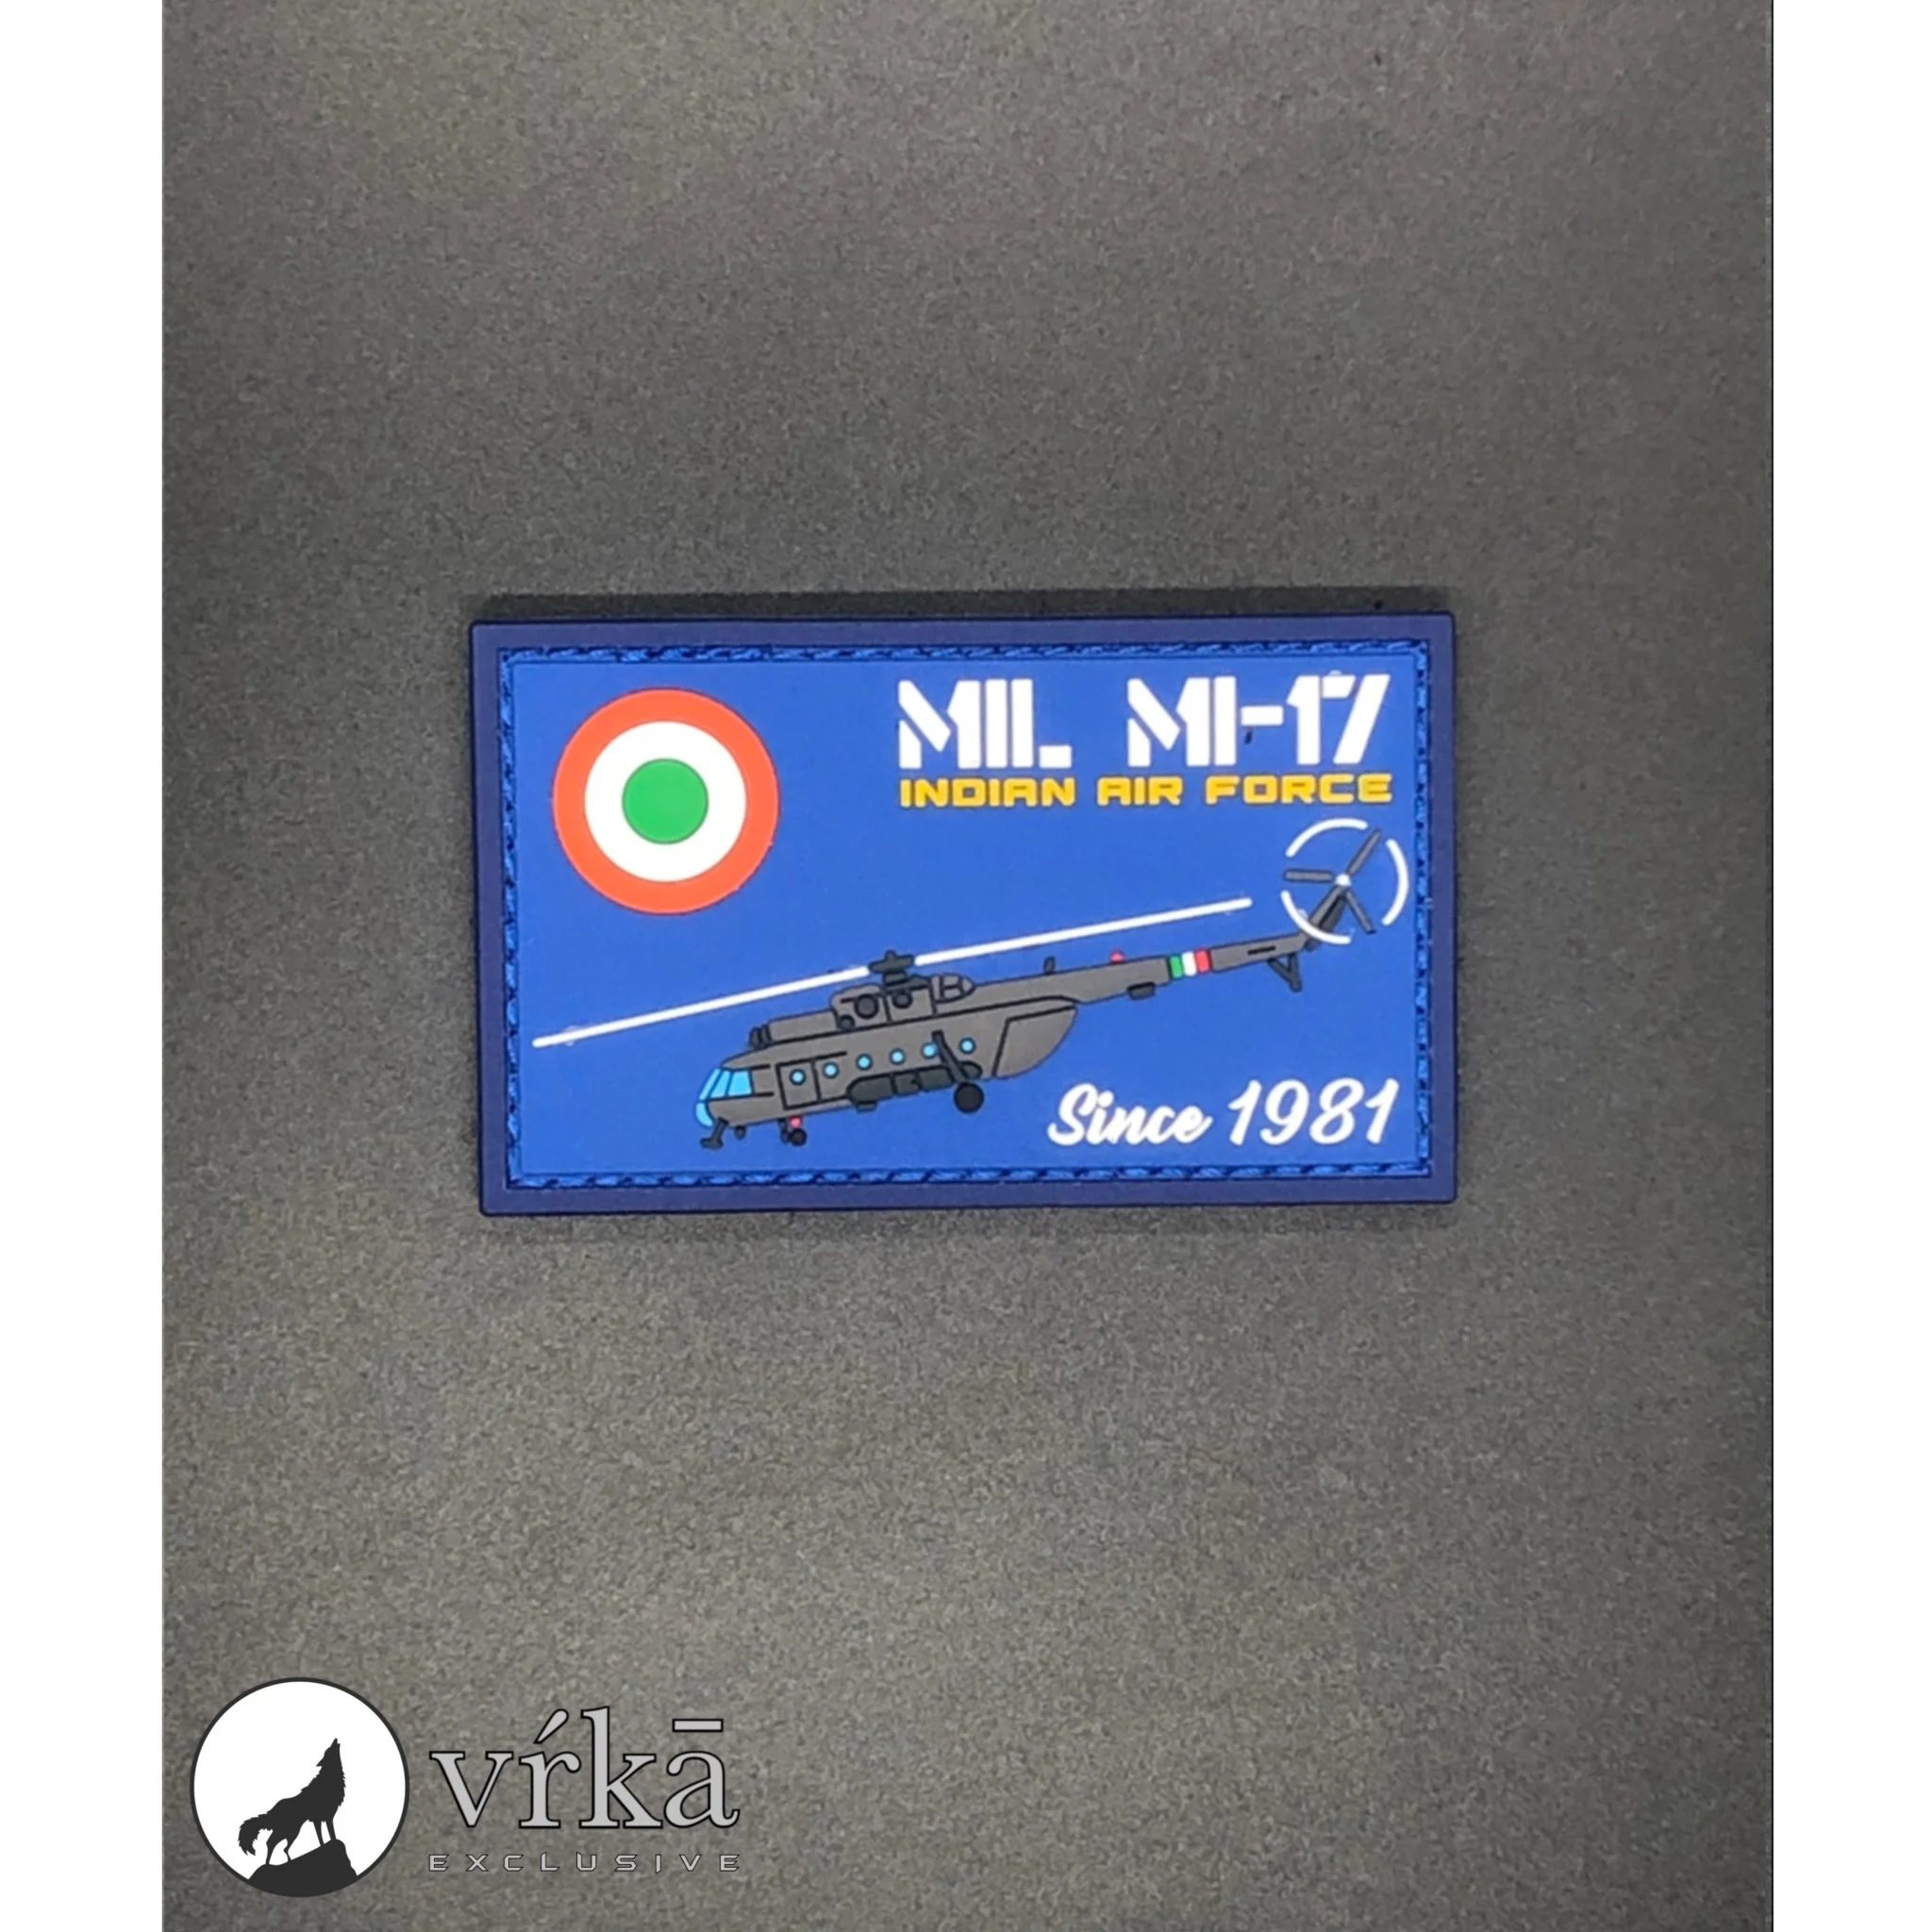 Featured image for “Mi 17 since 1981”